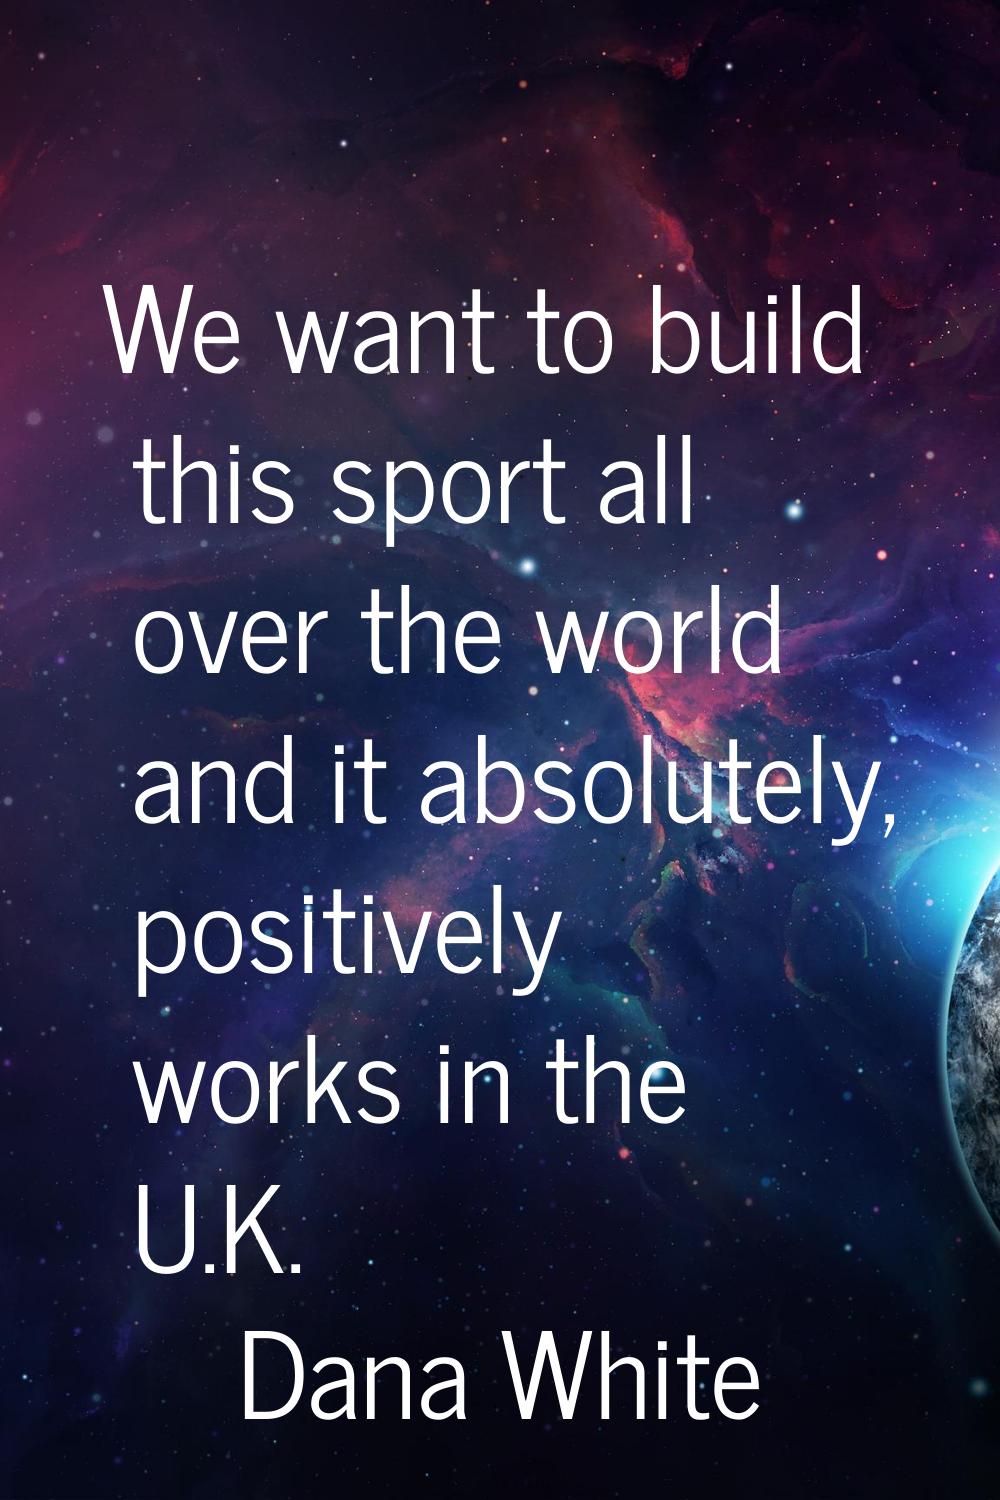 We want to build this sport all over the world and it absolutely, positively works in the U.K.